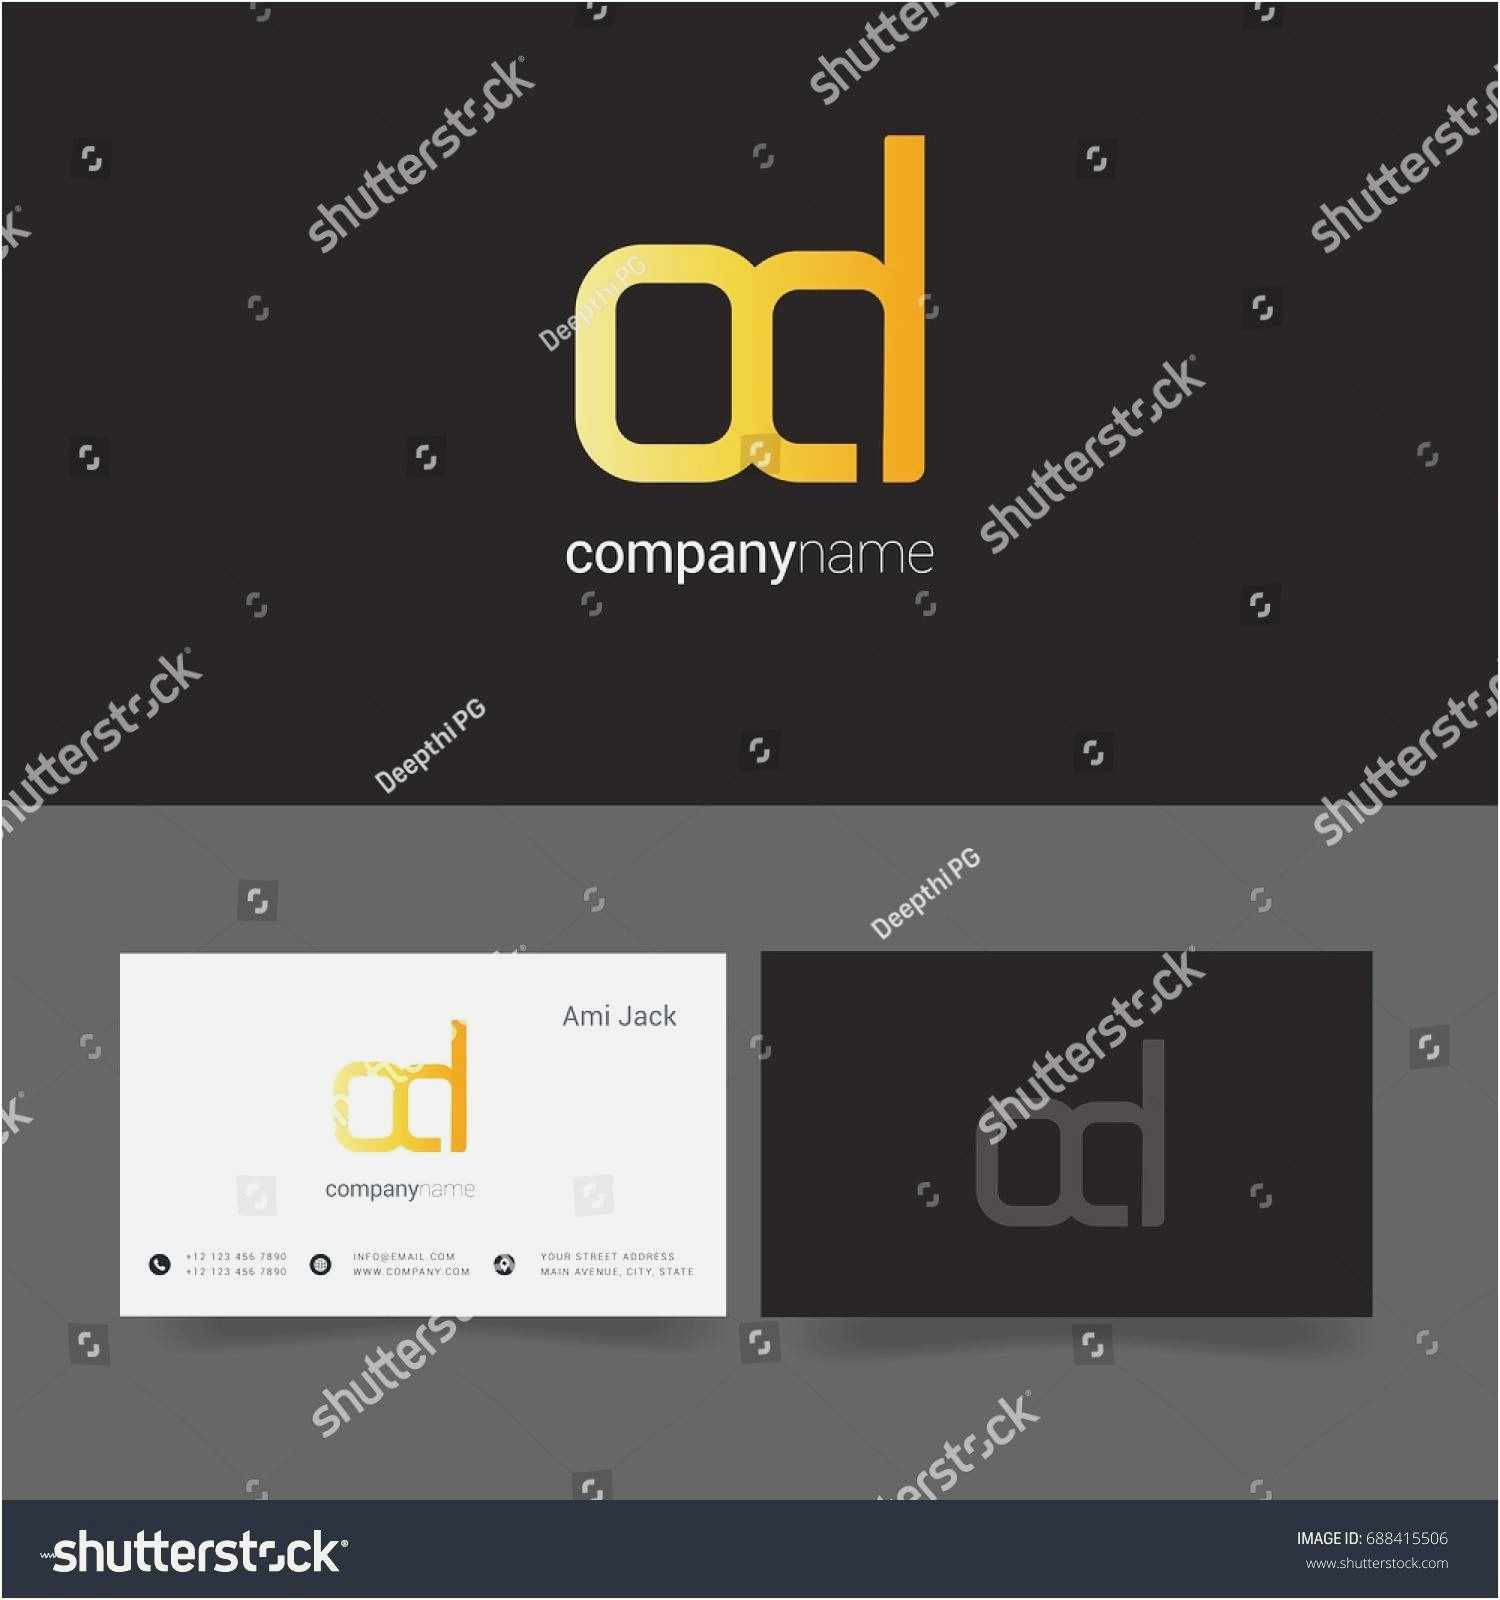 Download 45 Free Templates for Business Cards Example Of Creative Business Card Templates Free